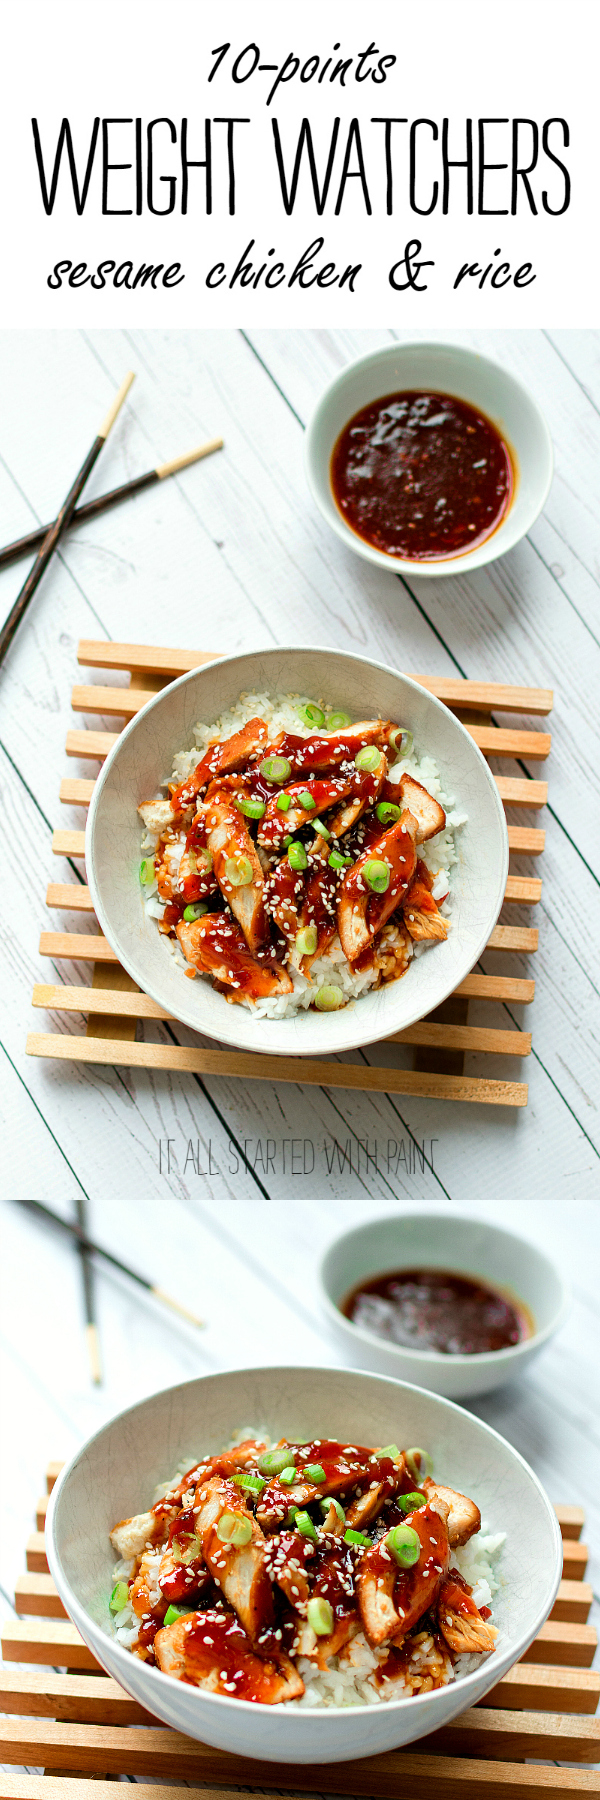 Sesame Chicken Recipe for Weight Watchers - Healthy and Easy